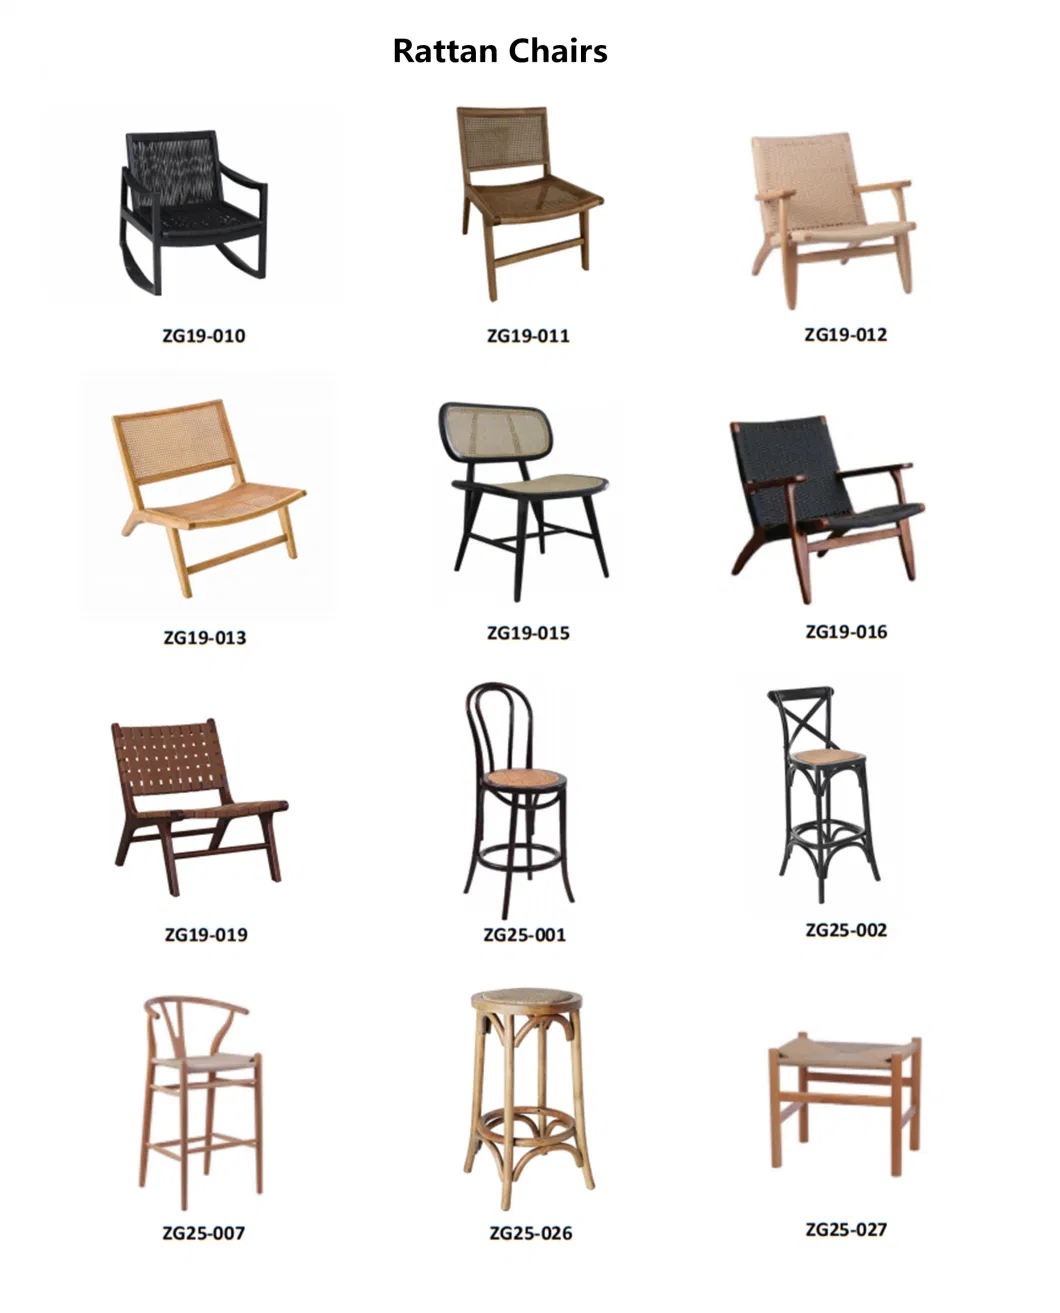 Hot Selling High Quality Modern Cafe Banquet Dining Chair Solid Wooden Stool Classic Wood Bar Rattan Chair (ZG25-027)